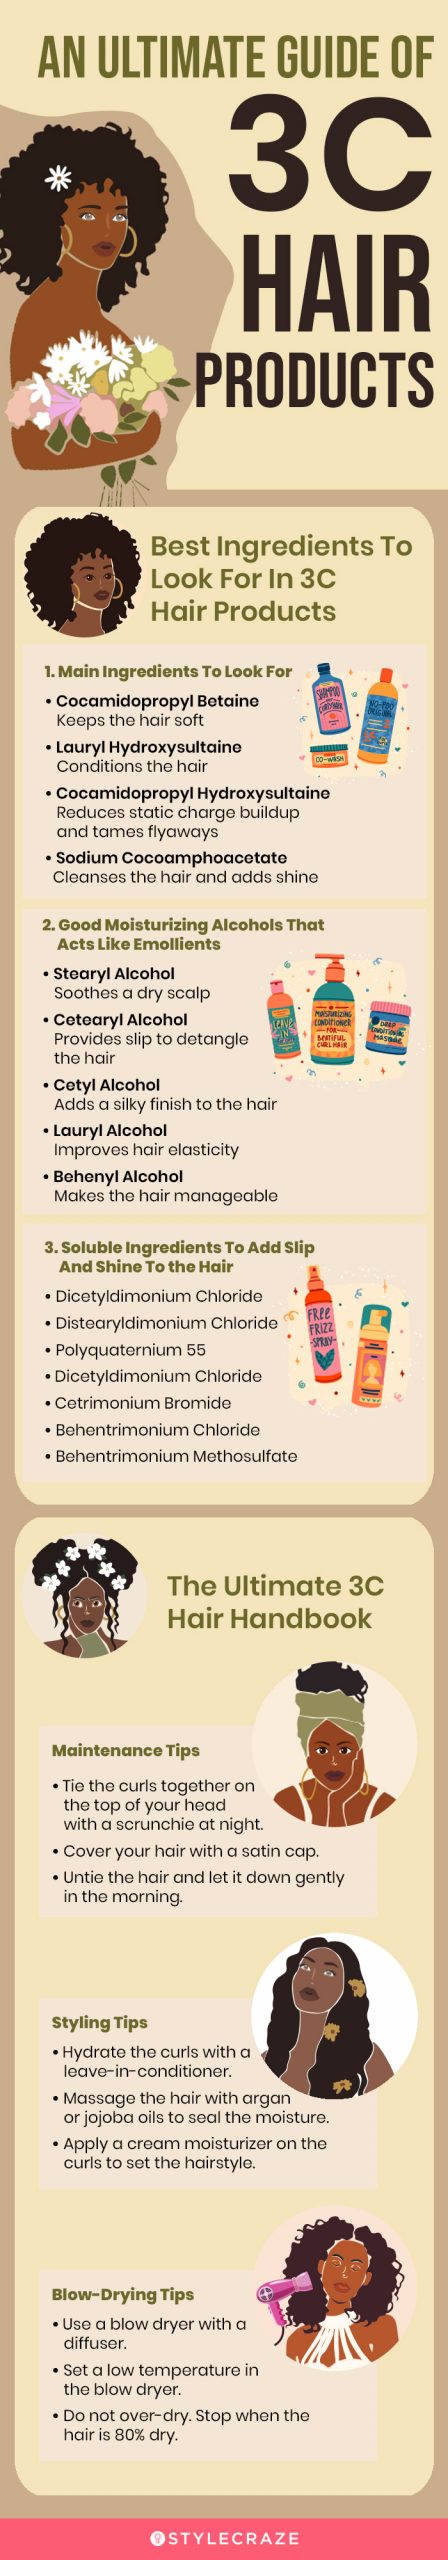 An Ultimate Guide Of 3C Hair Products (infographic)